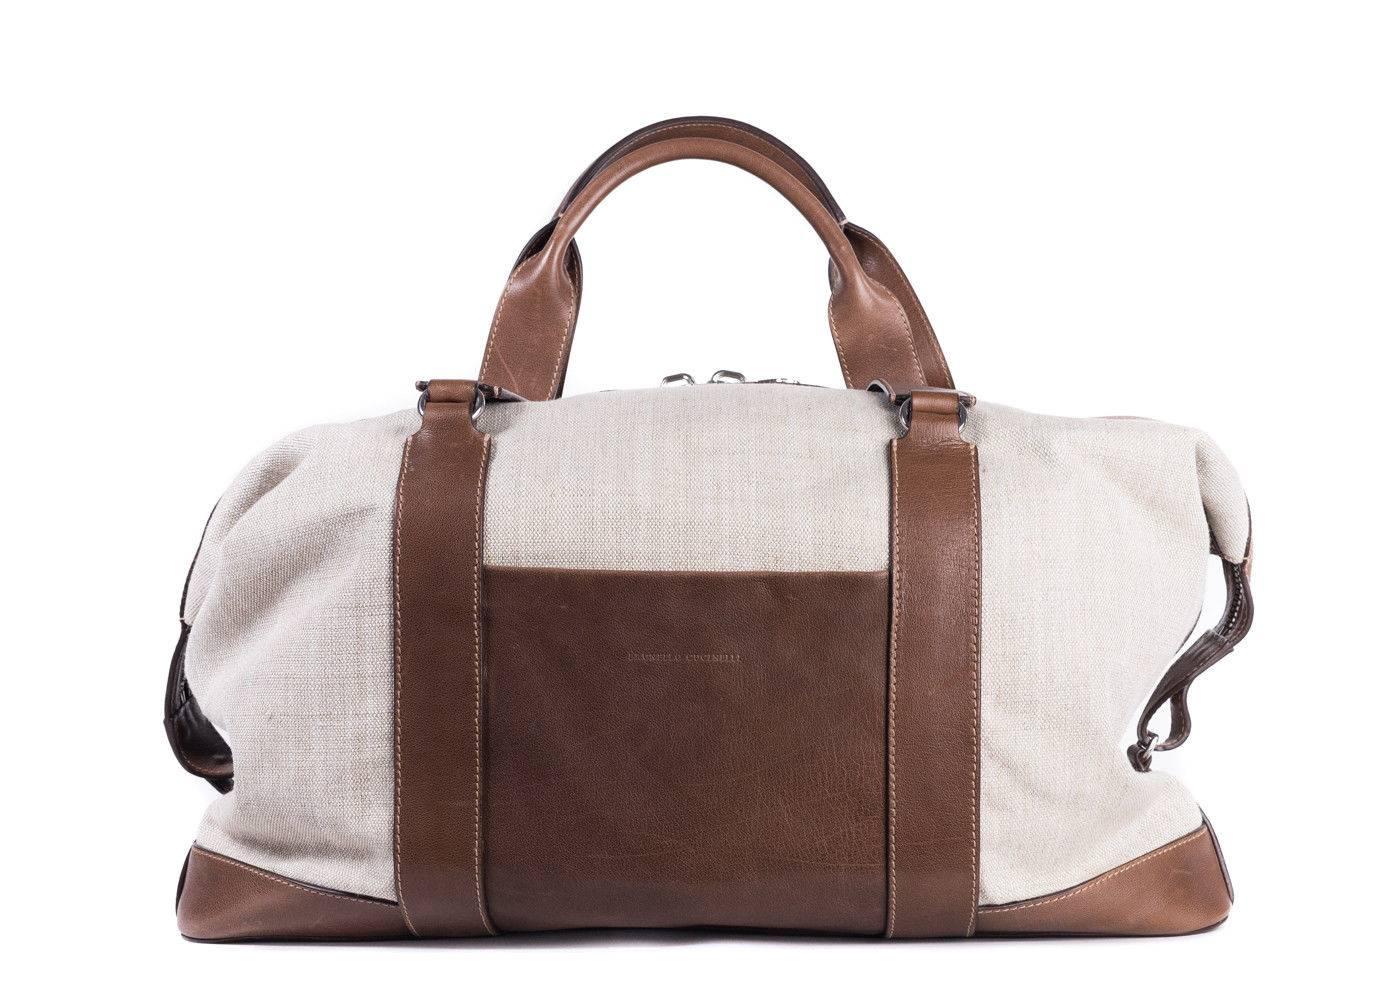 Brand New Brunello Cucinelli Messenger Bag
Dust Bag Included
Retails in Stores & Online for $2850
Dimensions: 24"L x 10"H x10"D

Just like Brunello Cucinelli's clothing, this holdall is timeless, well crafted and elegantly